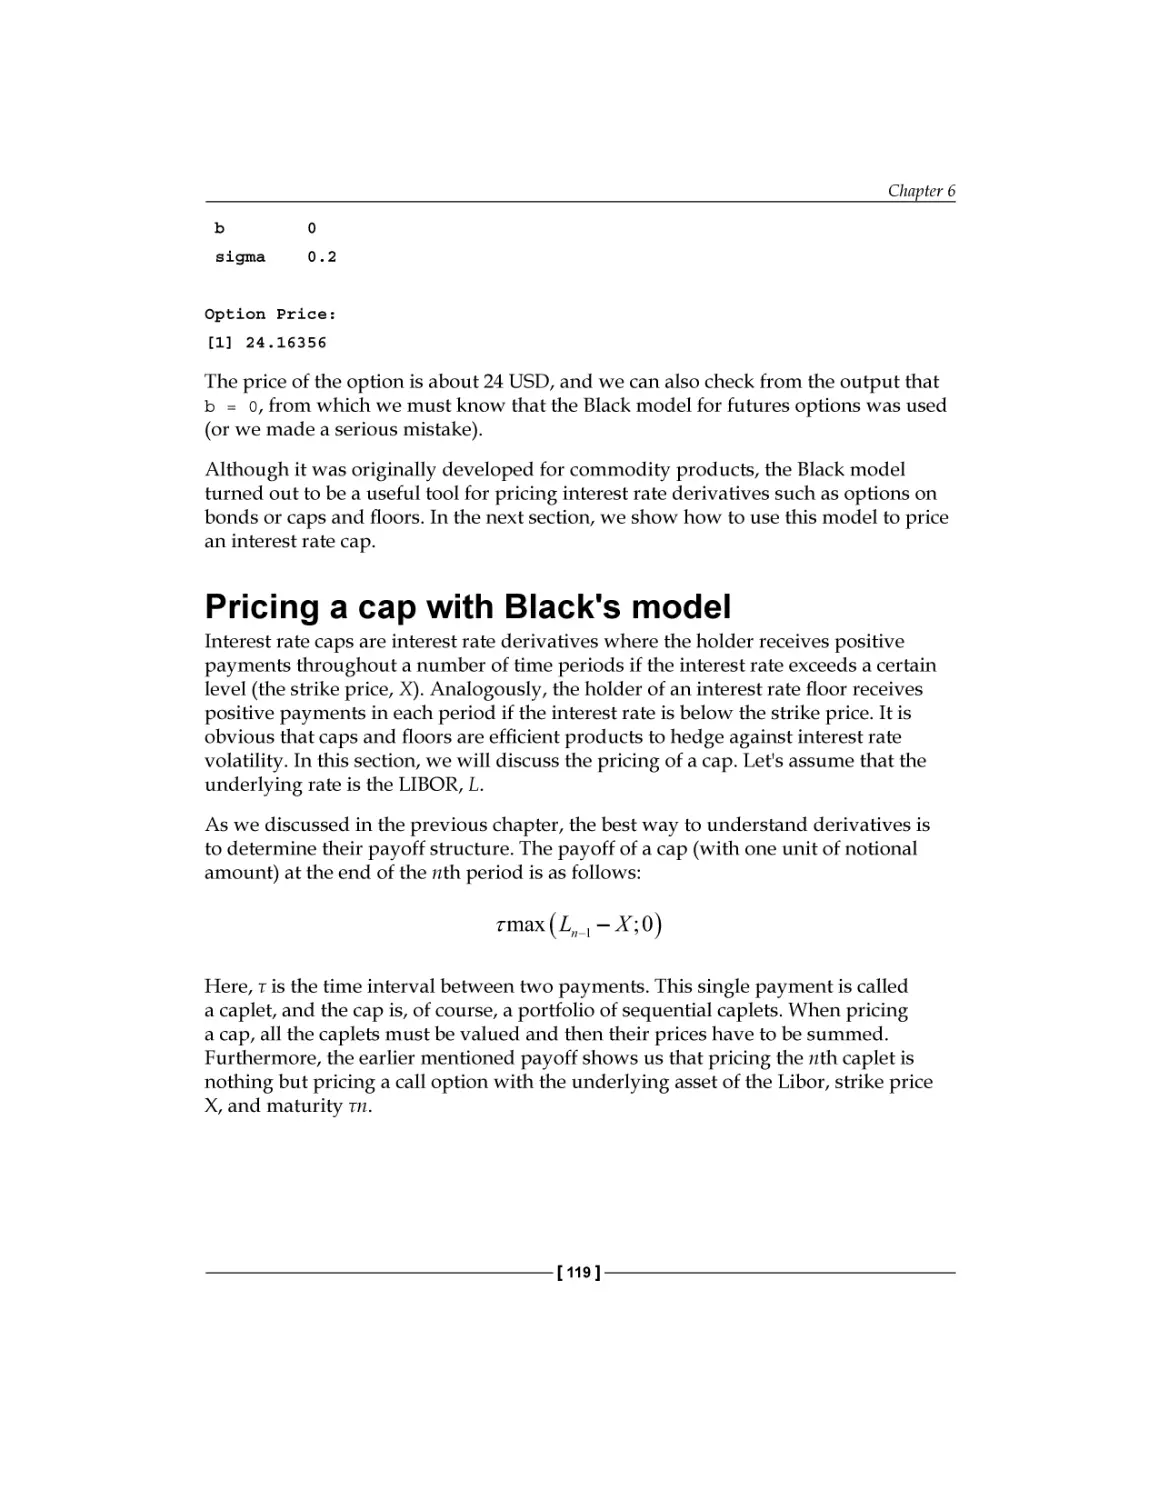 Pricing a cap with Black's model